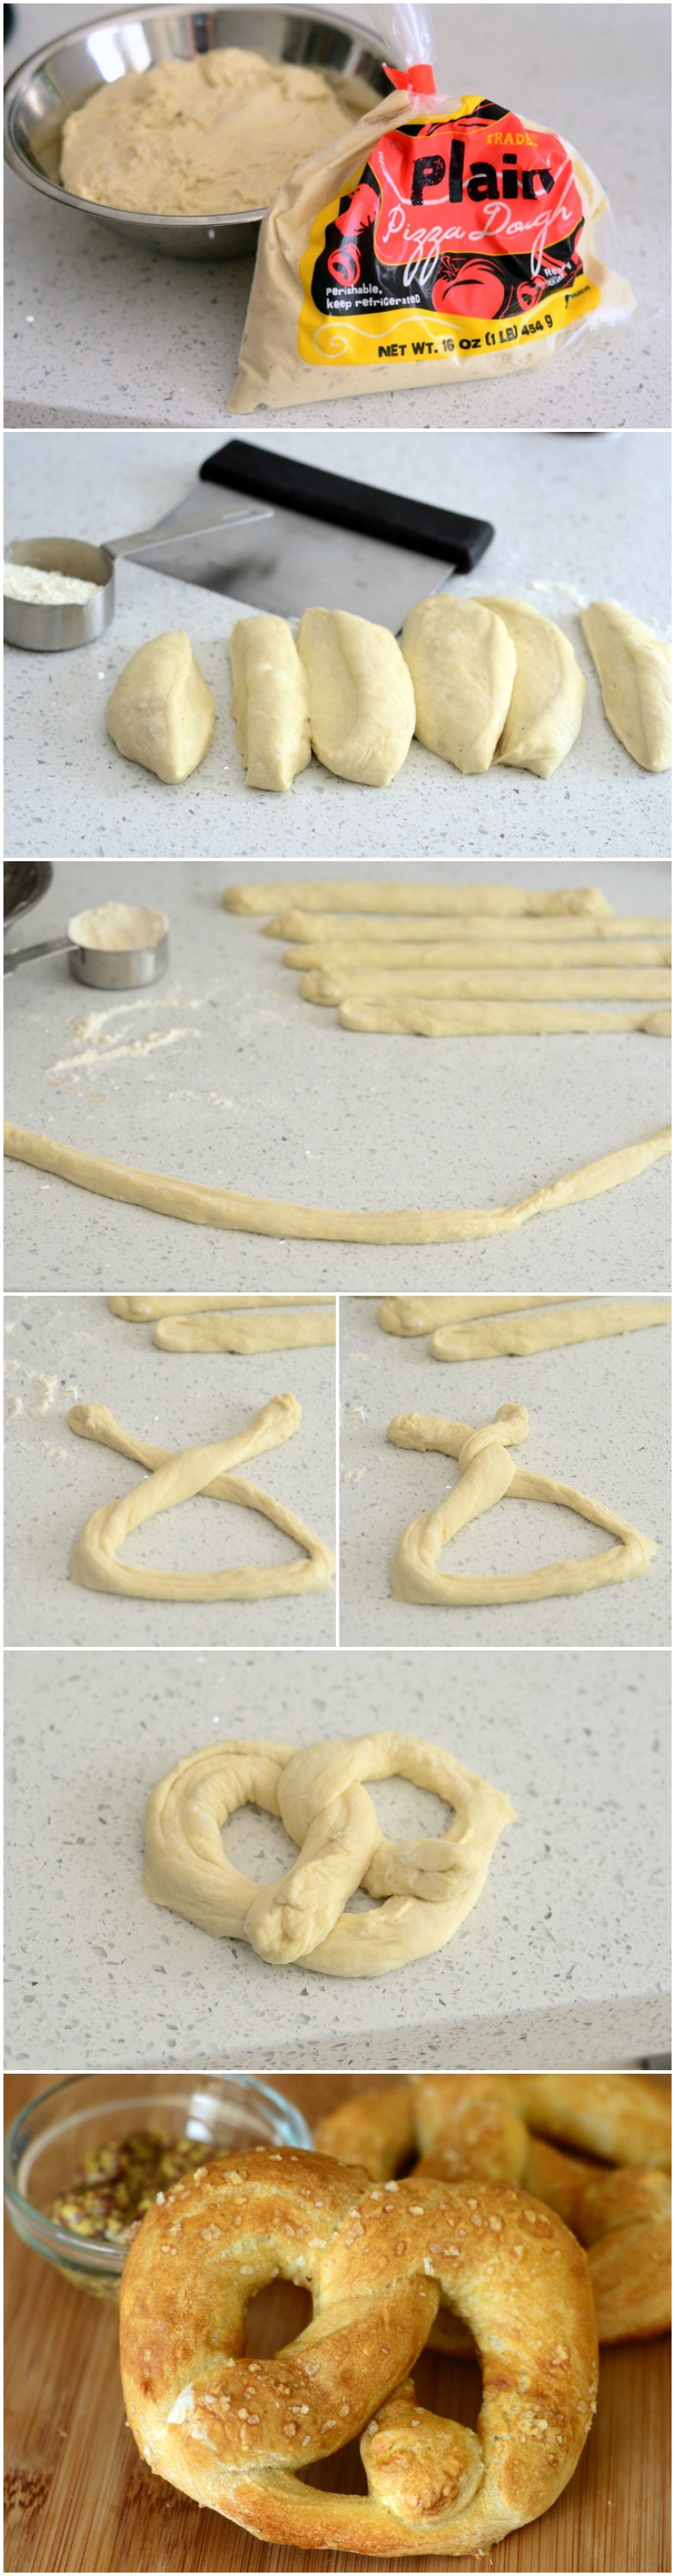 These are the fastest homemade pretzels you'll ever make! Just use store-bought or homemade pizza dough for fresh, chewy, home-baked pretzels.